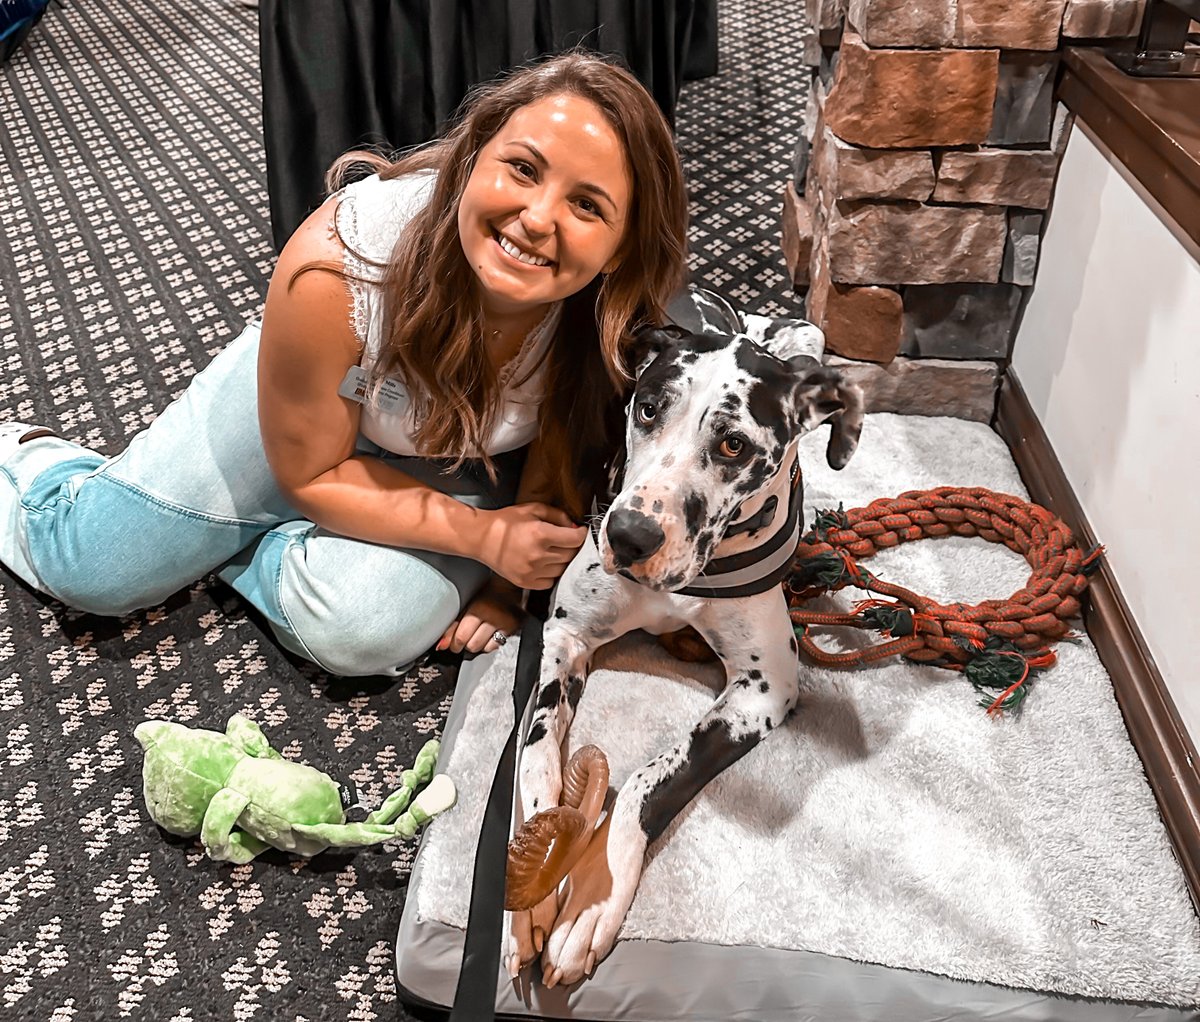 Looks like Kaley Clowdus found the cutest attendee at the MO Employment Conference. 🐶

Thank you for hosting us, #MEC2024. Making connections, both professional and furry, has been the highlight of our day.

#UMSL #Networking #HigherEducation #GraduateSchool #Business #AACSB